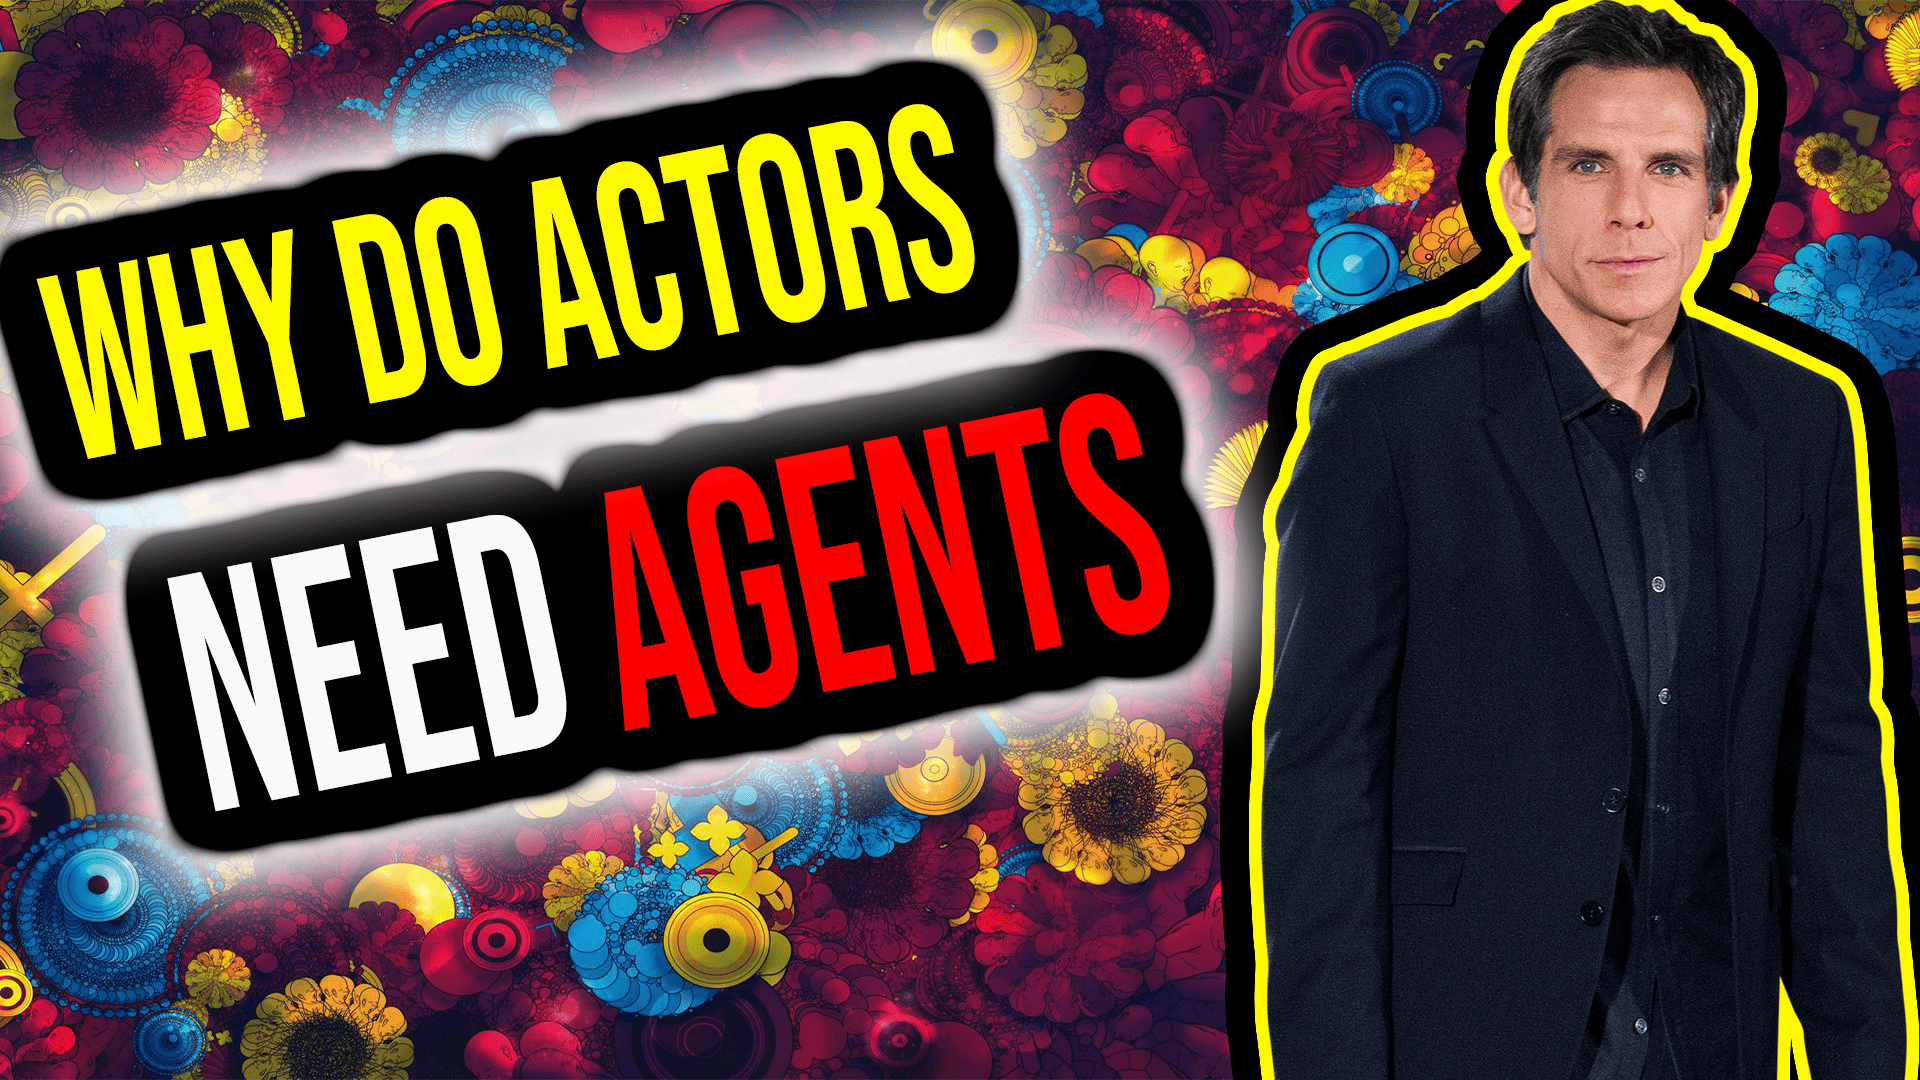 Why Do Actors Need Agents? An In-Depth Look At The Benefits